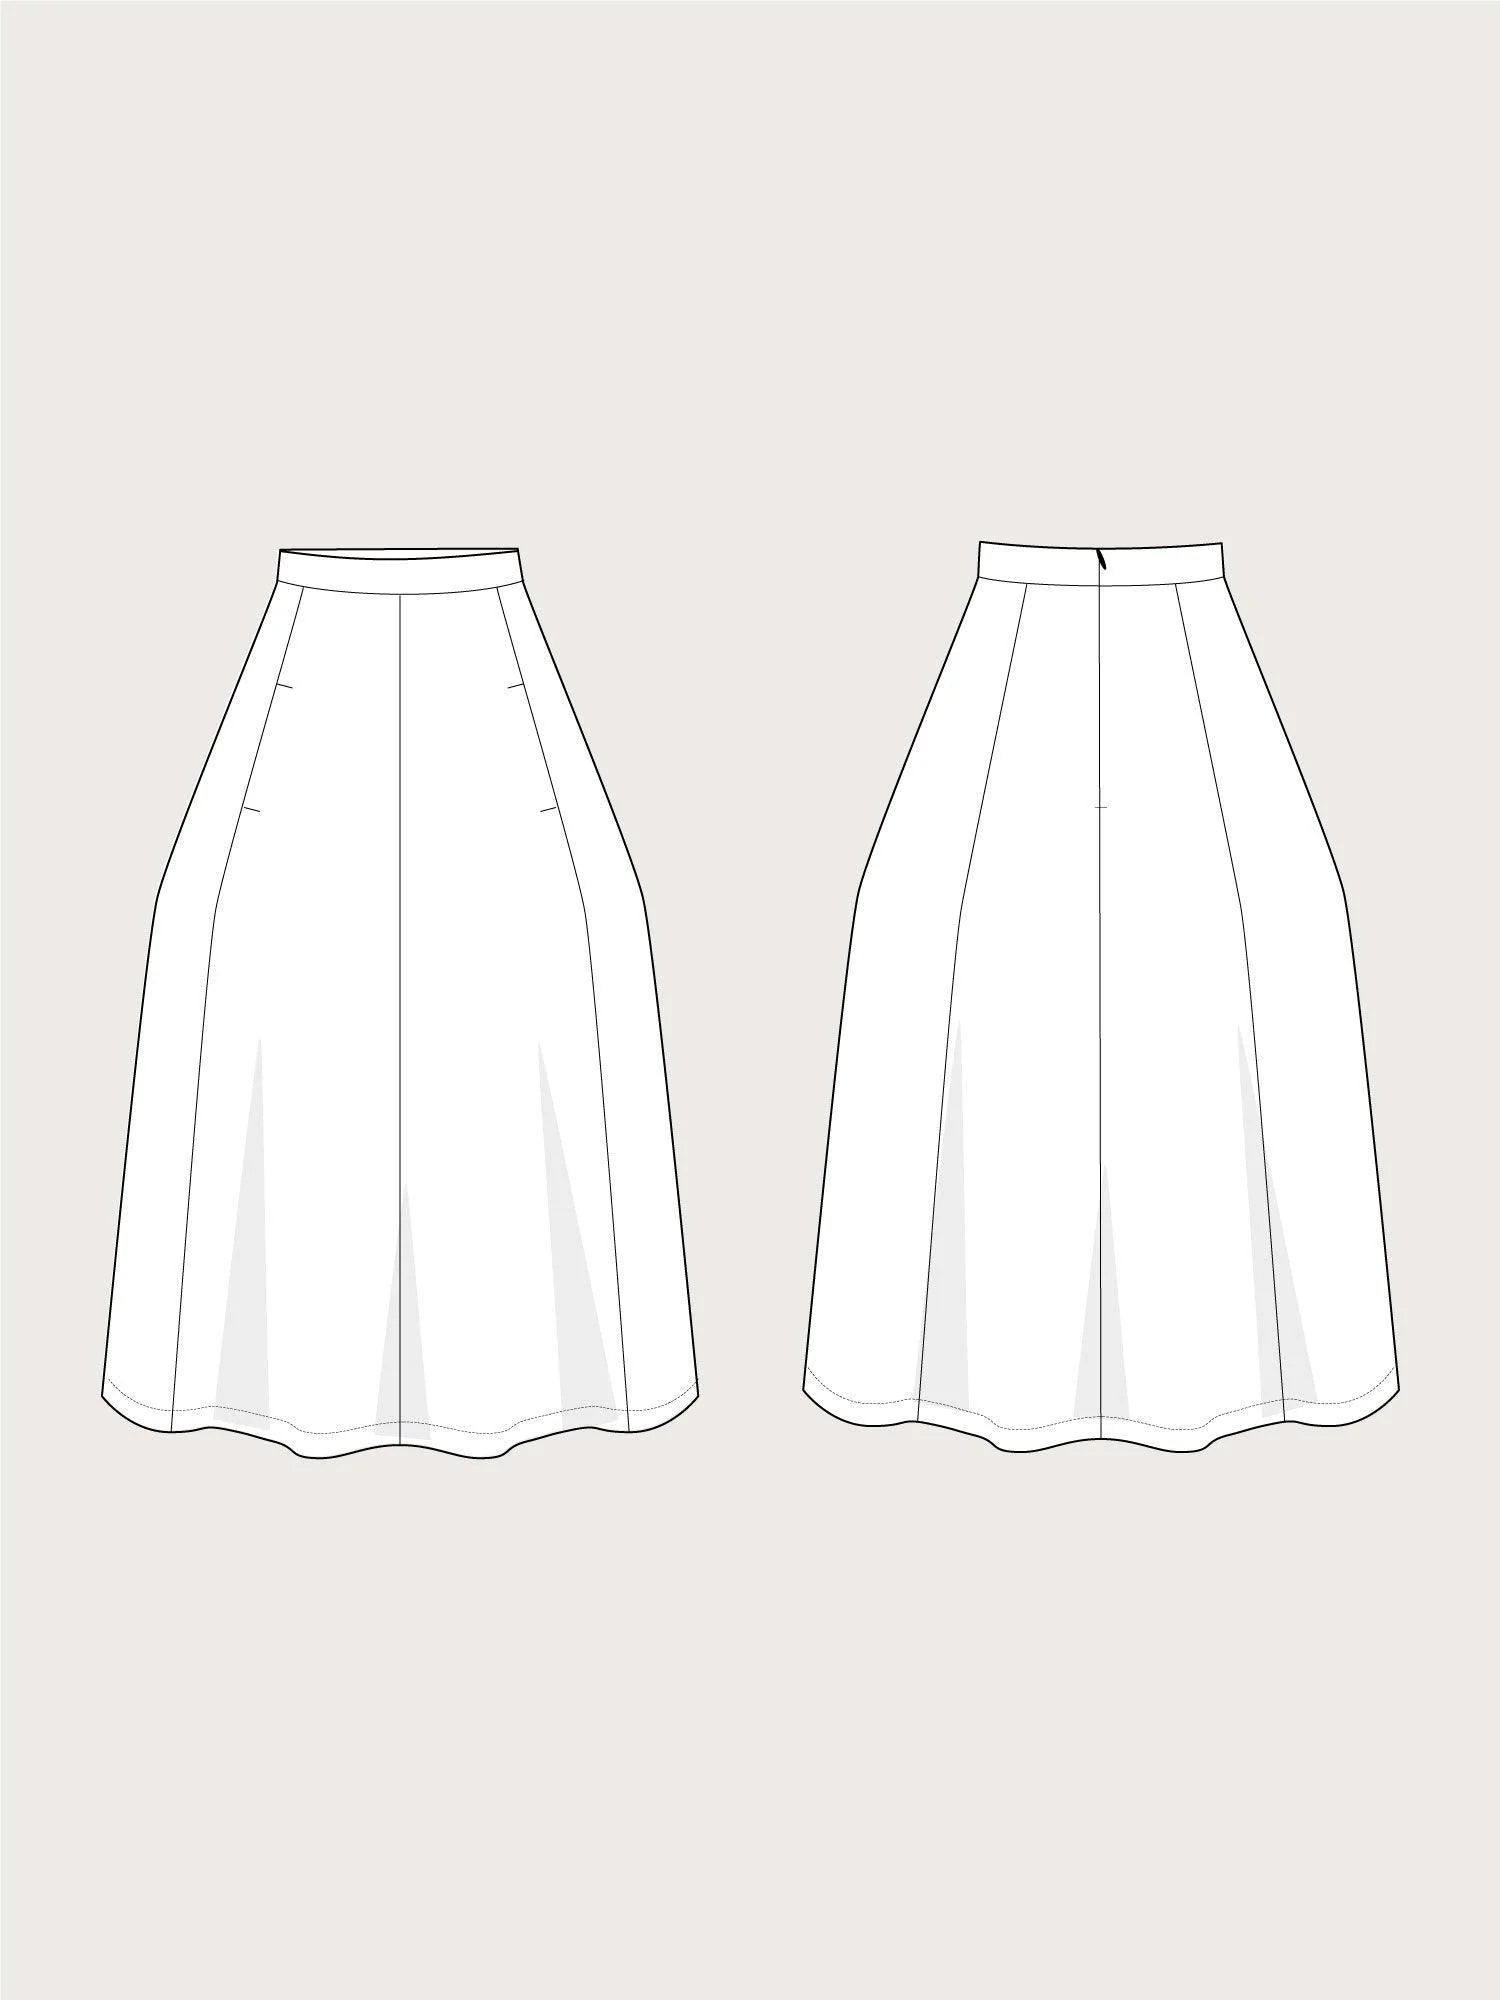 Tulip Skirt sewing pattern by The Assembly Line